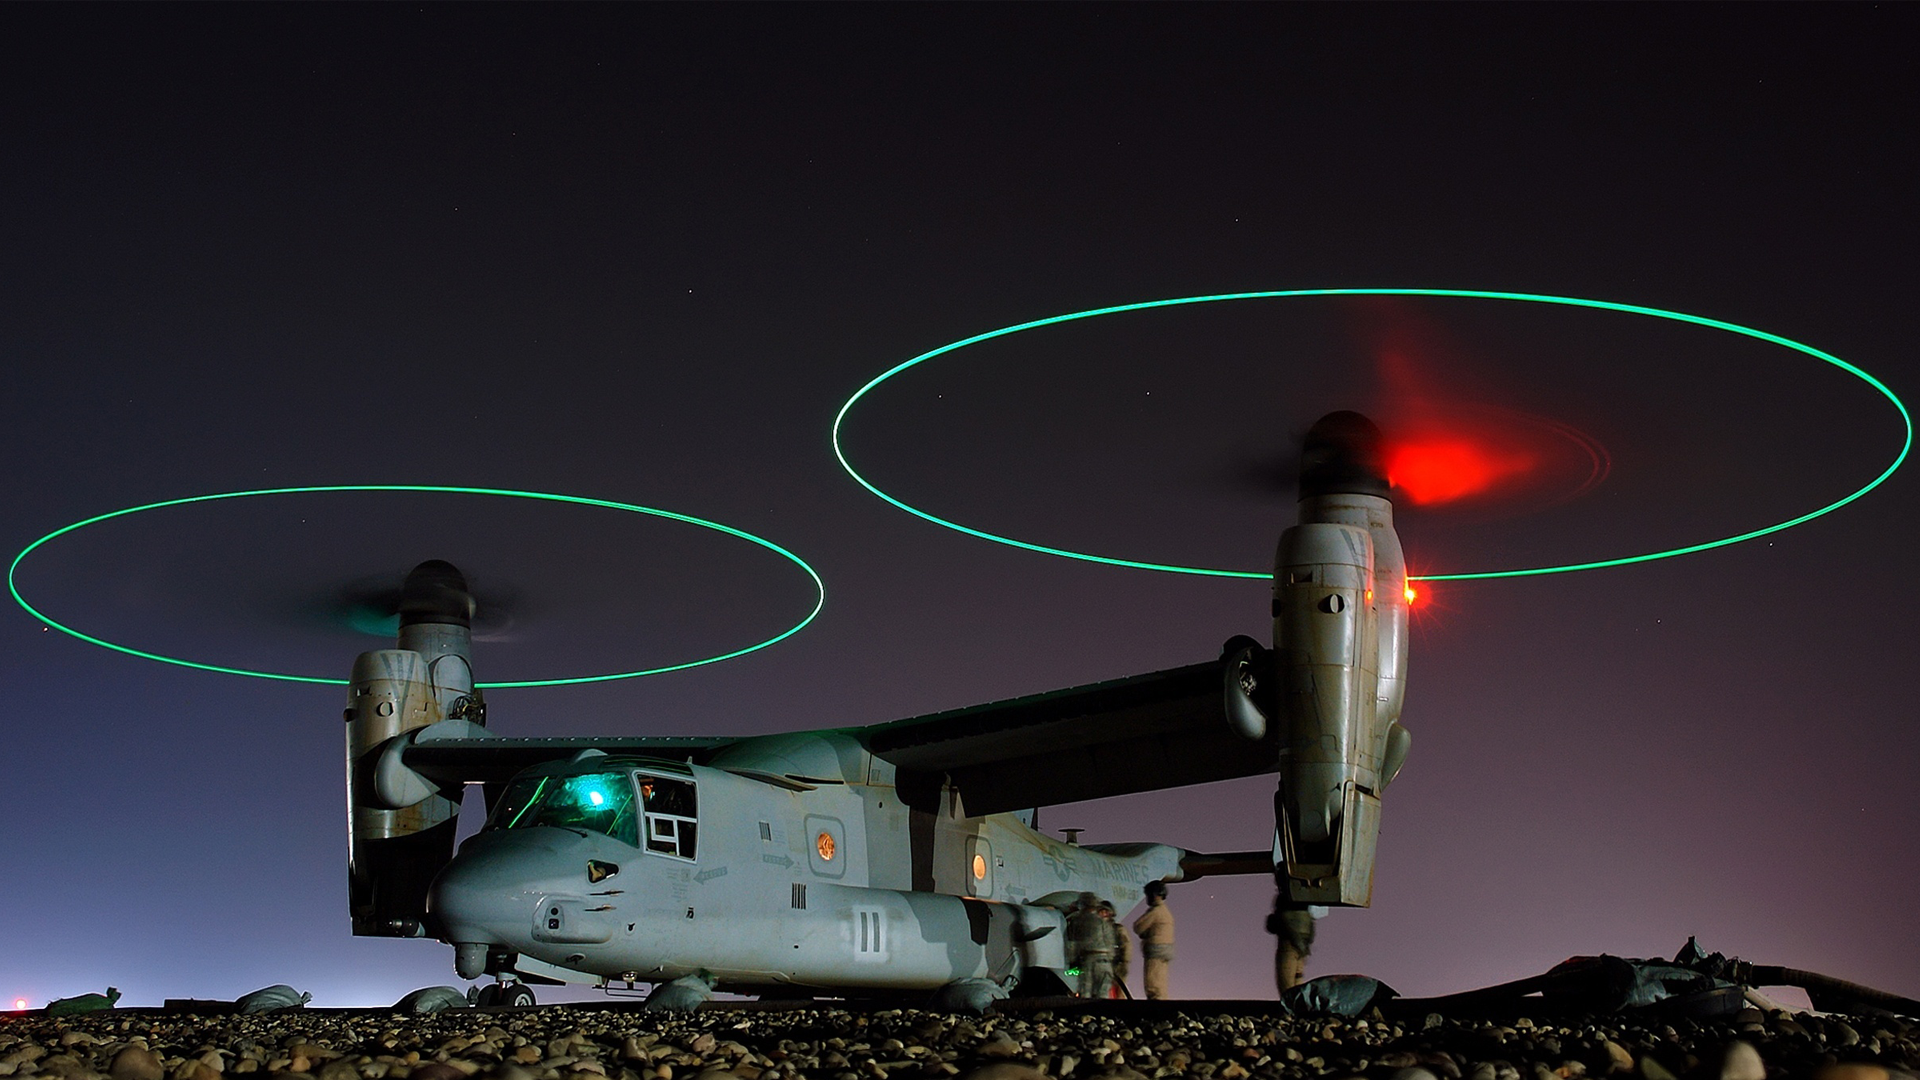 General 1920x1080 military military aircraft United States Marine Corps marines military vehicle Boeing-Bell V-22 Osprey vehicle tiltrotor night long exposure Second Gulf War Iraq 2008 (Year) refueling light trails American aircraft Boeing